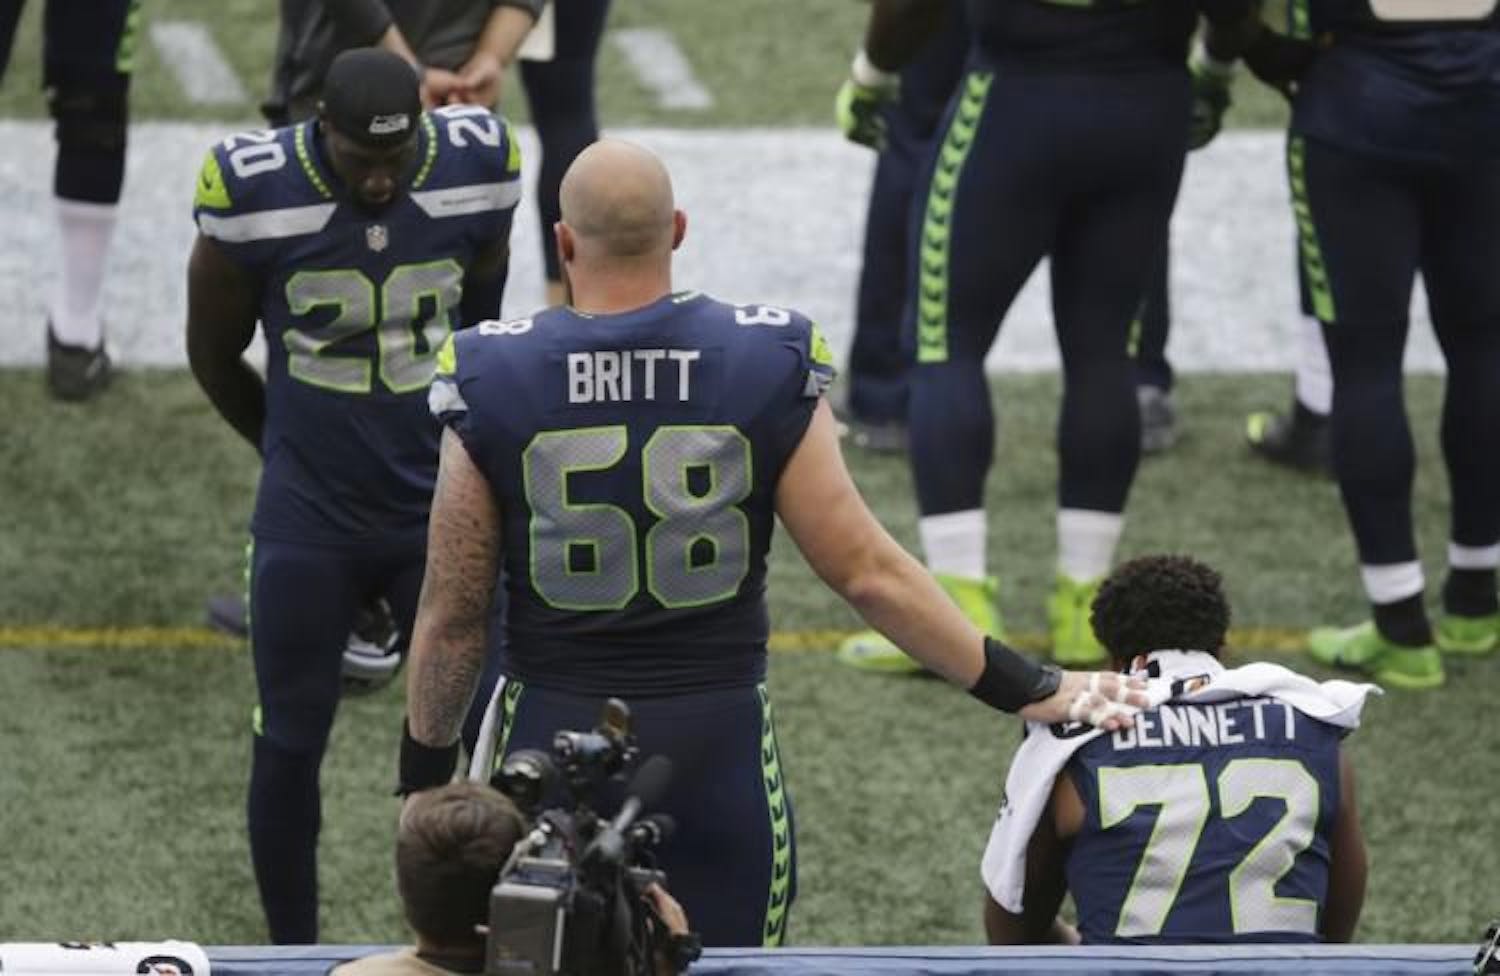 Seahawks center Justin Britt and cornerback Jeremy Lane stand near defensive end Michael Bennett as Bennett sits on the bench during the national anthem Friday, Aug. 18, 2017, in Seattle. (Scott Eklund / AP)